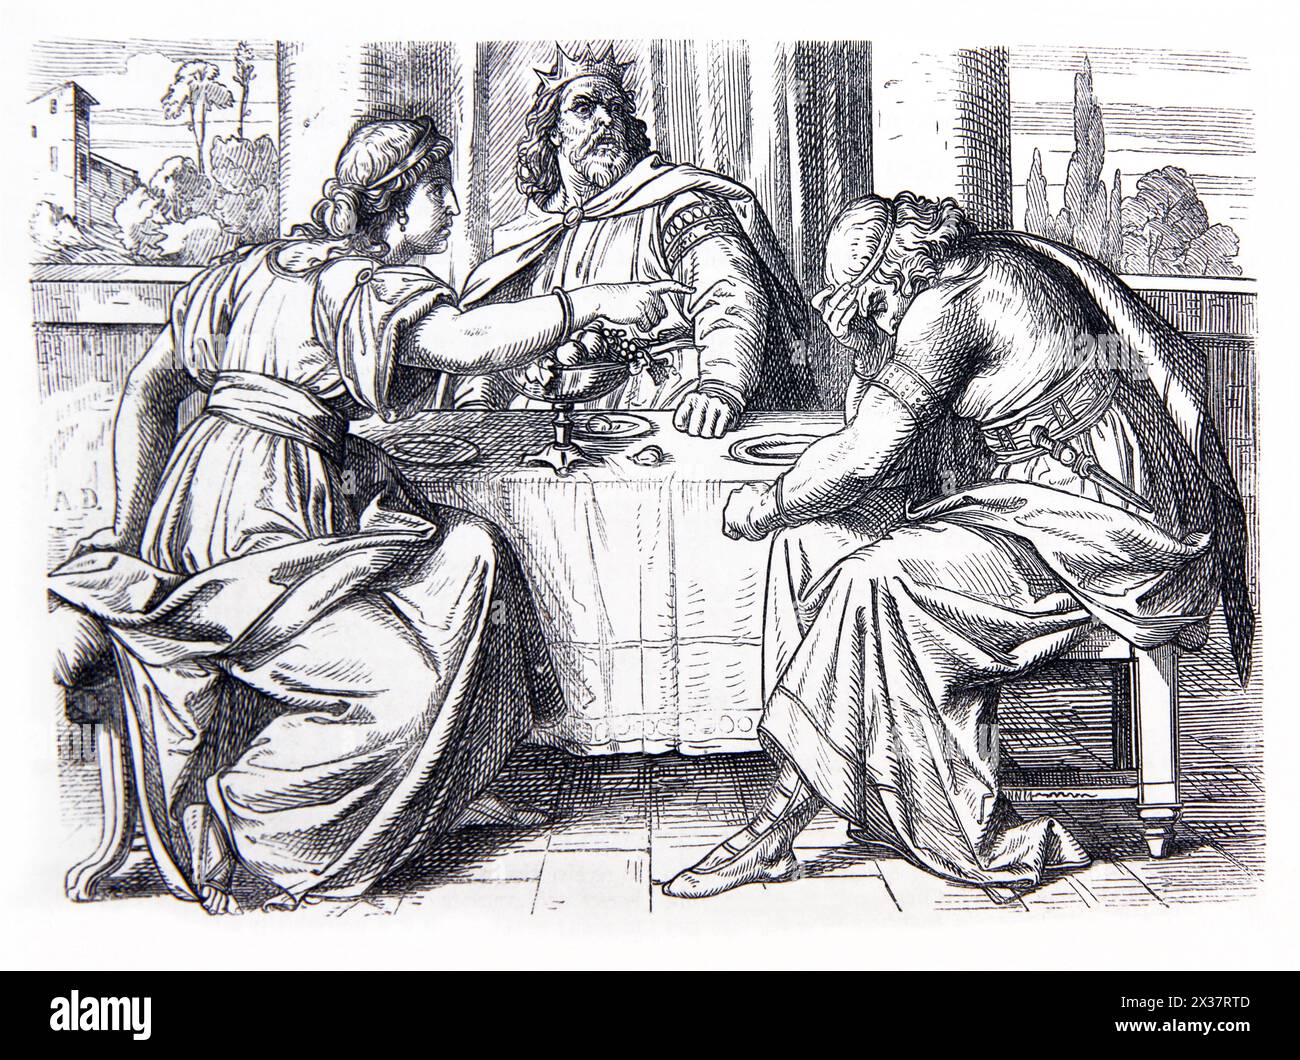 Bible Story 'And Esther Said , The Adversary and Enemy is the Wicked Haman' At her Second Banquet Party Queen Esther Pleaded to King Ahasuerus to Save Stock Photo